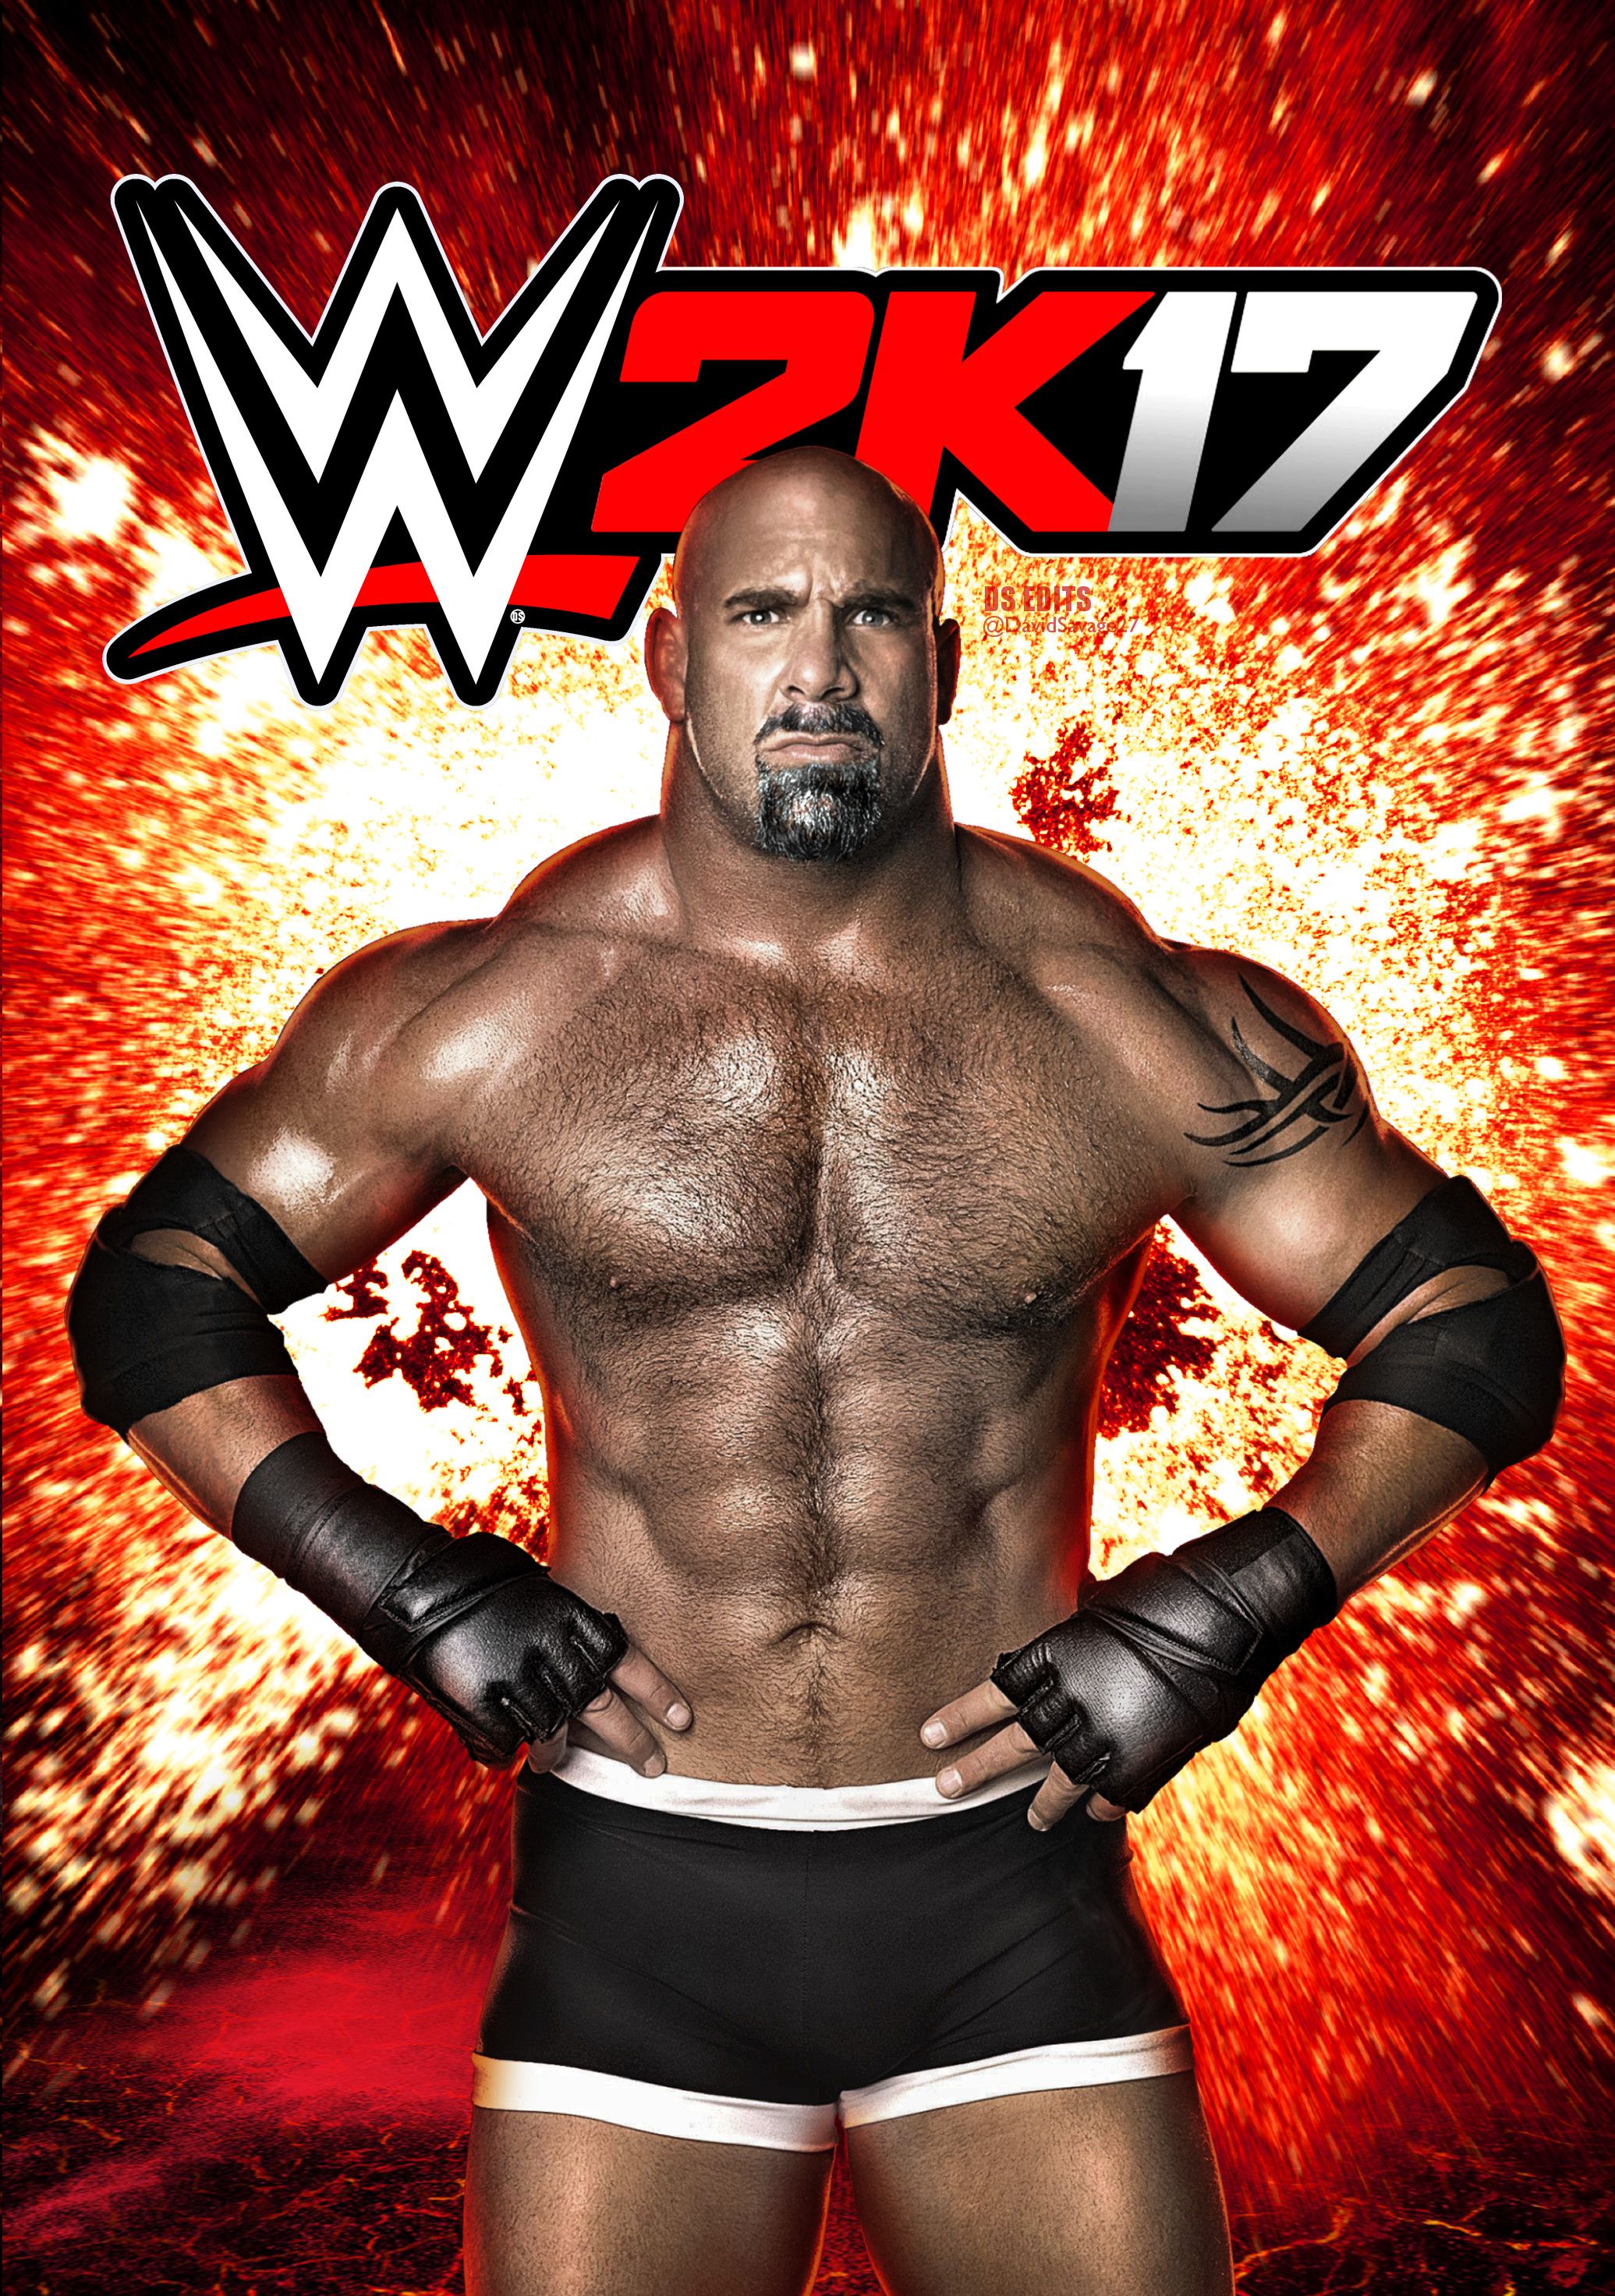 Wwe Raw Wallpaper background picture